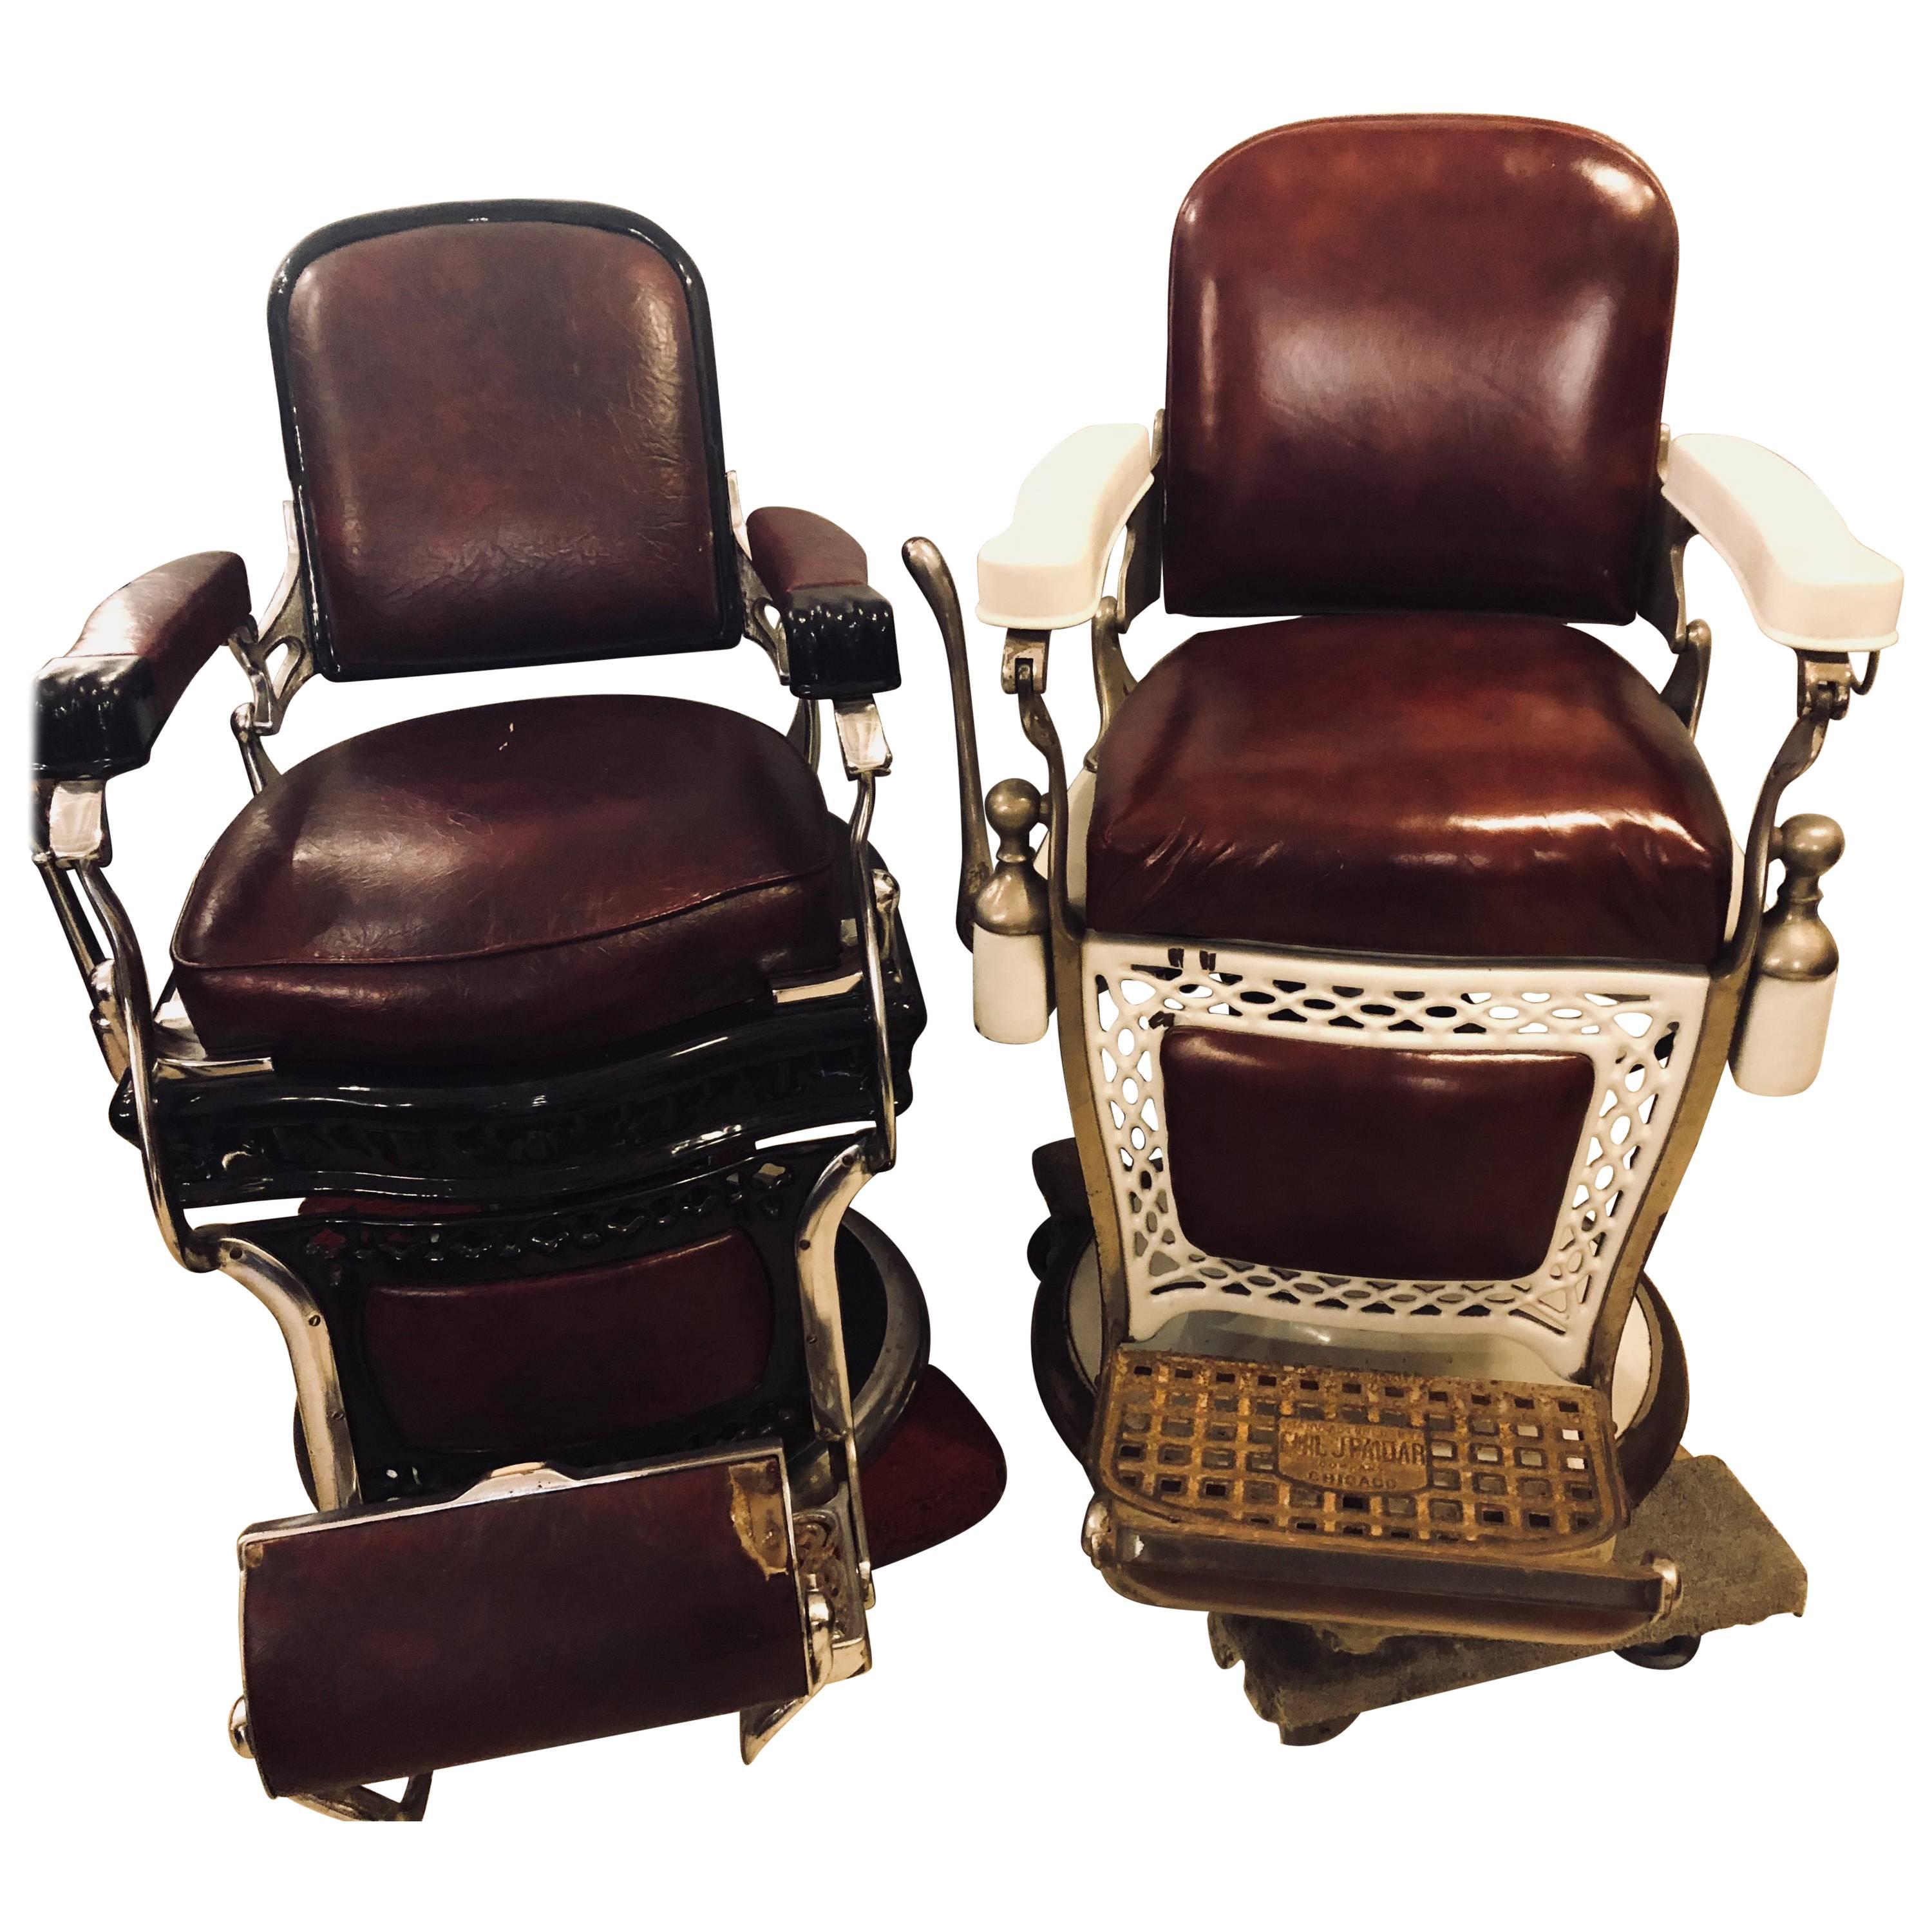 Two Vintage Barber Chairs